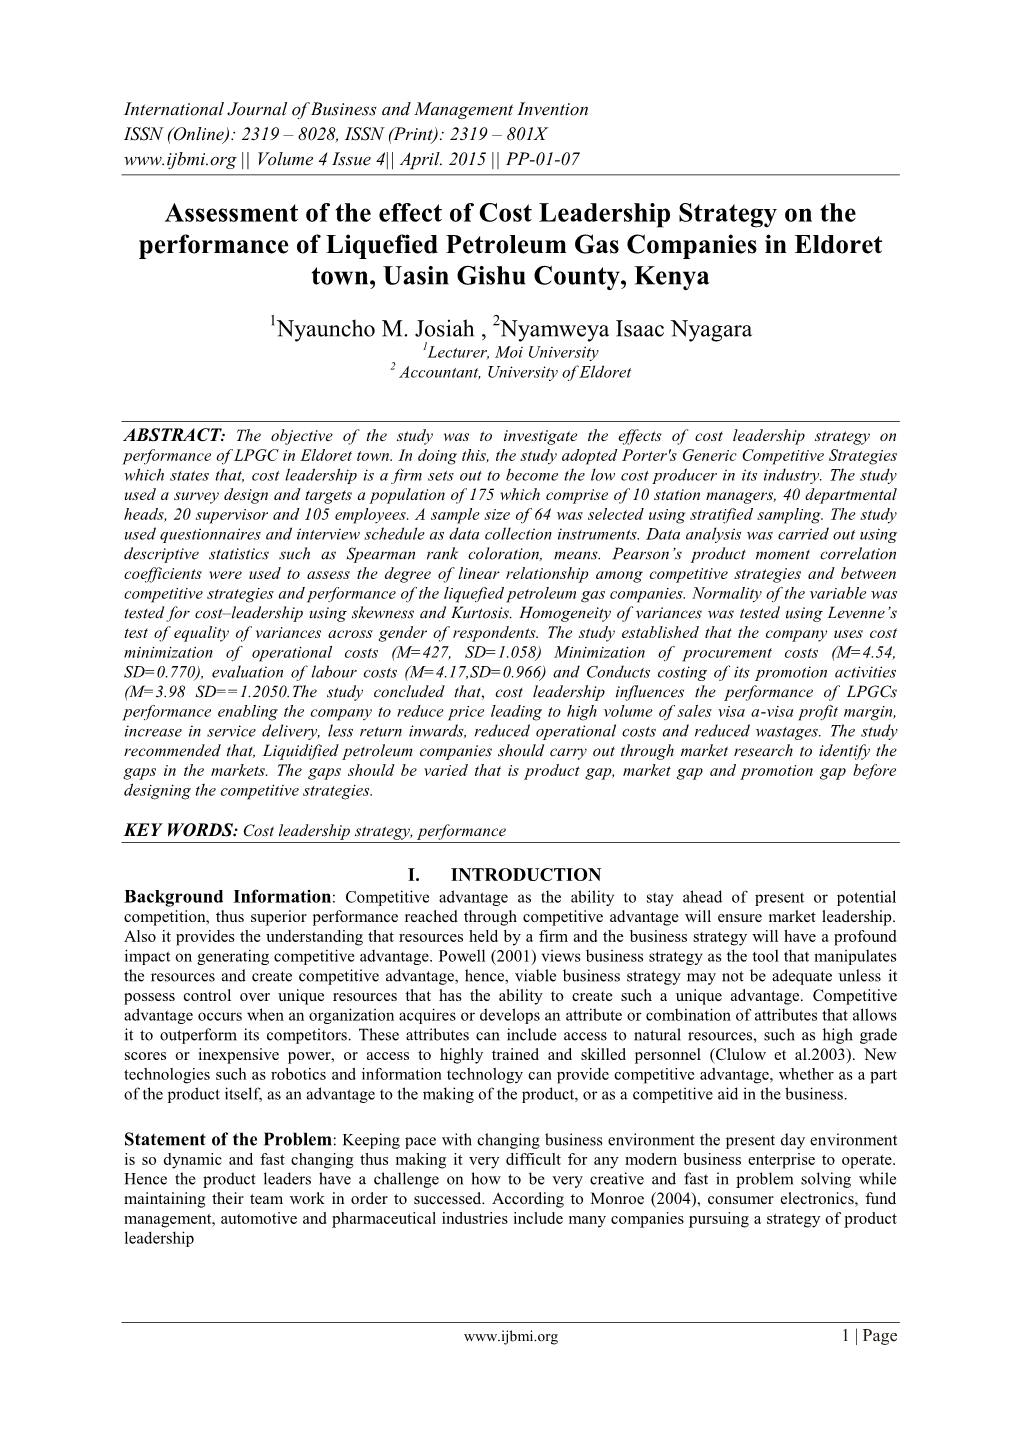 Assessment of the Effect of Cost Leadership Strategy on the Performance of Liquefied Petroleum Gas Companies in Eldoret Town, Uasin Gishu County, Kenya